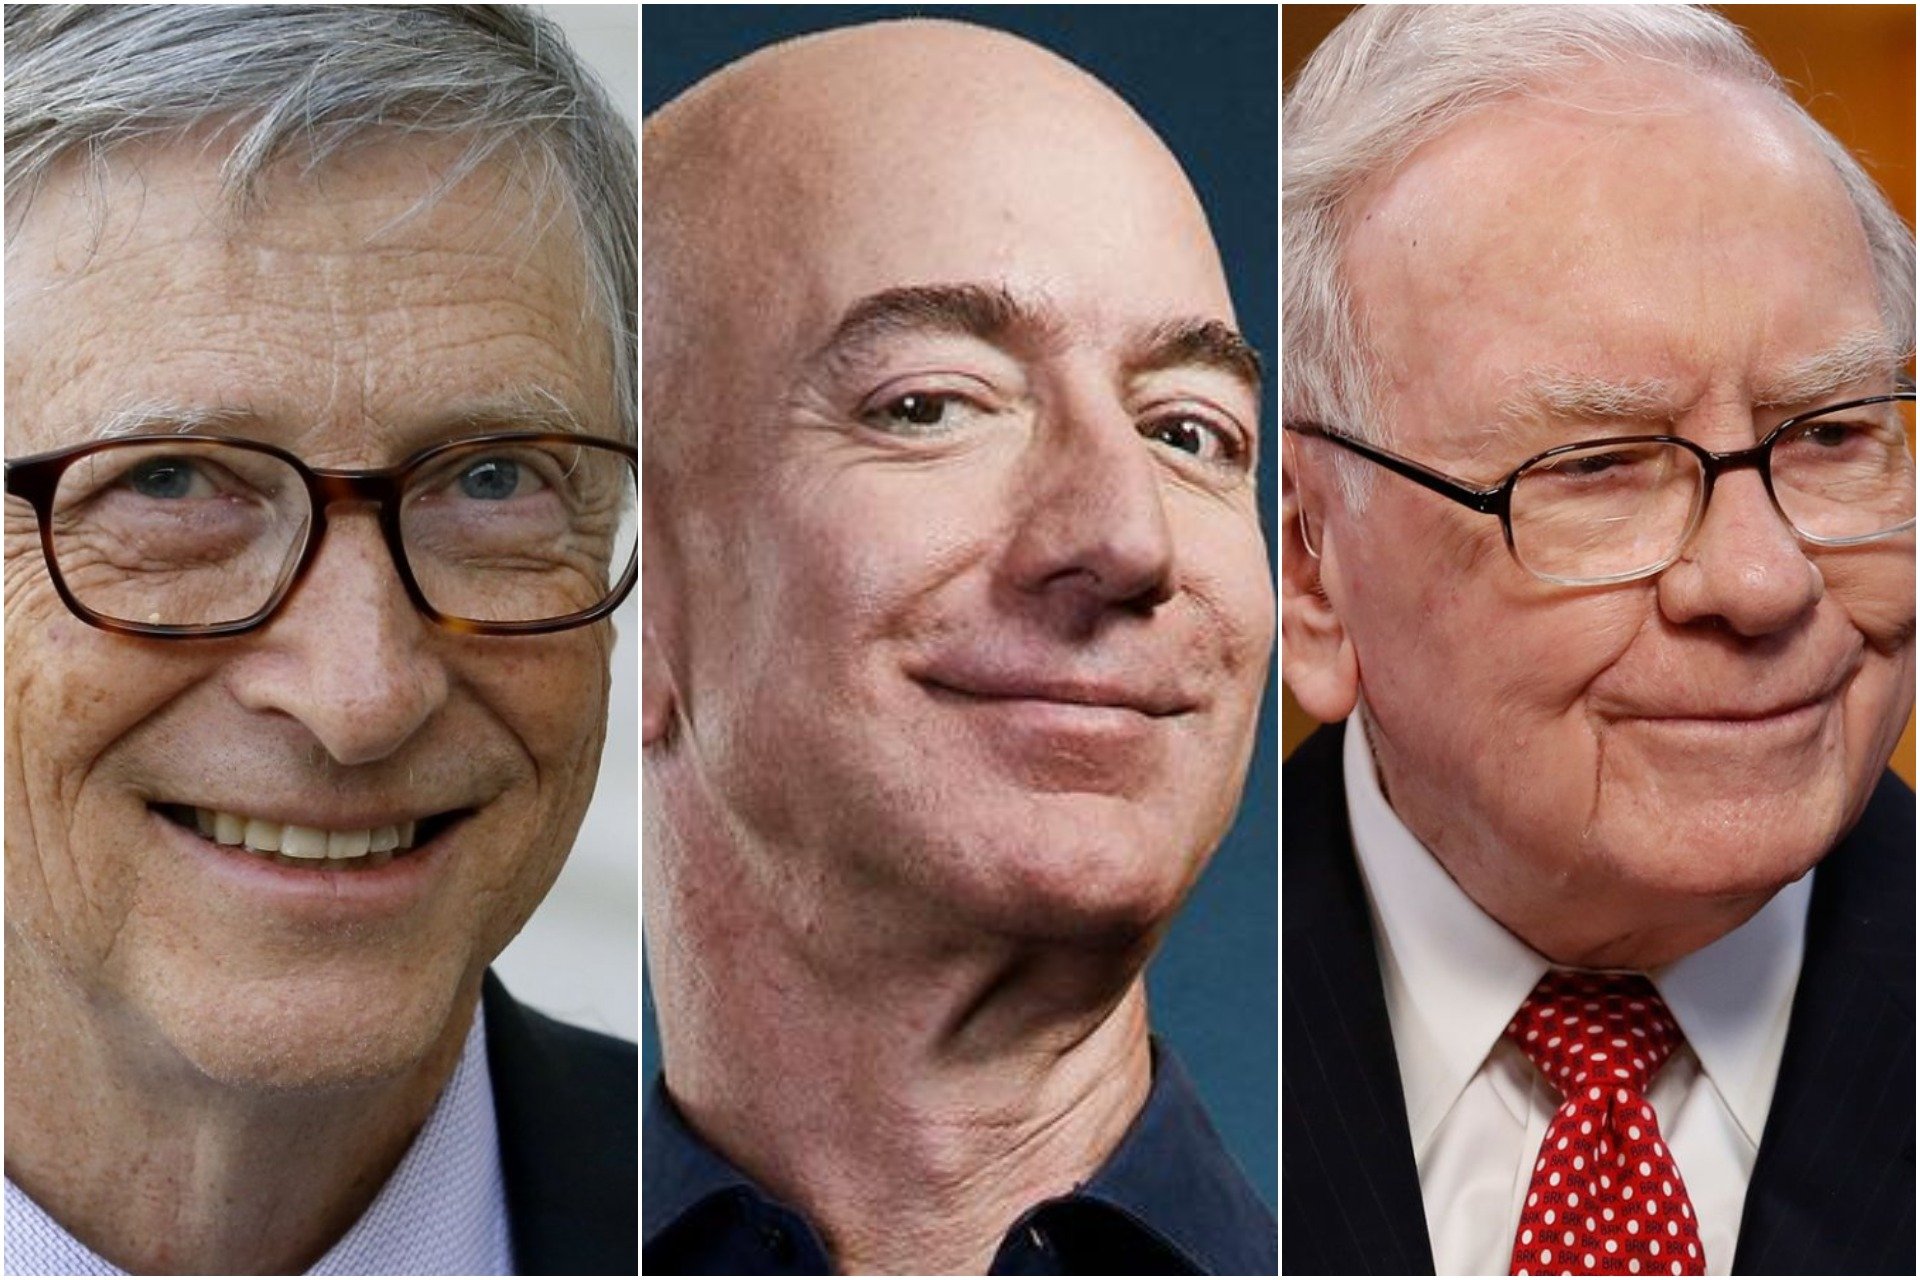 Forbes' Top 10 Billionaires In The World For 2019